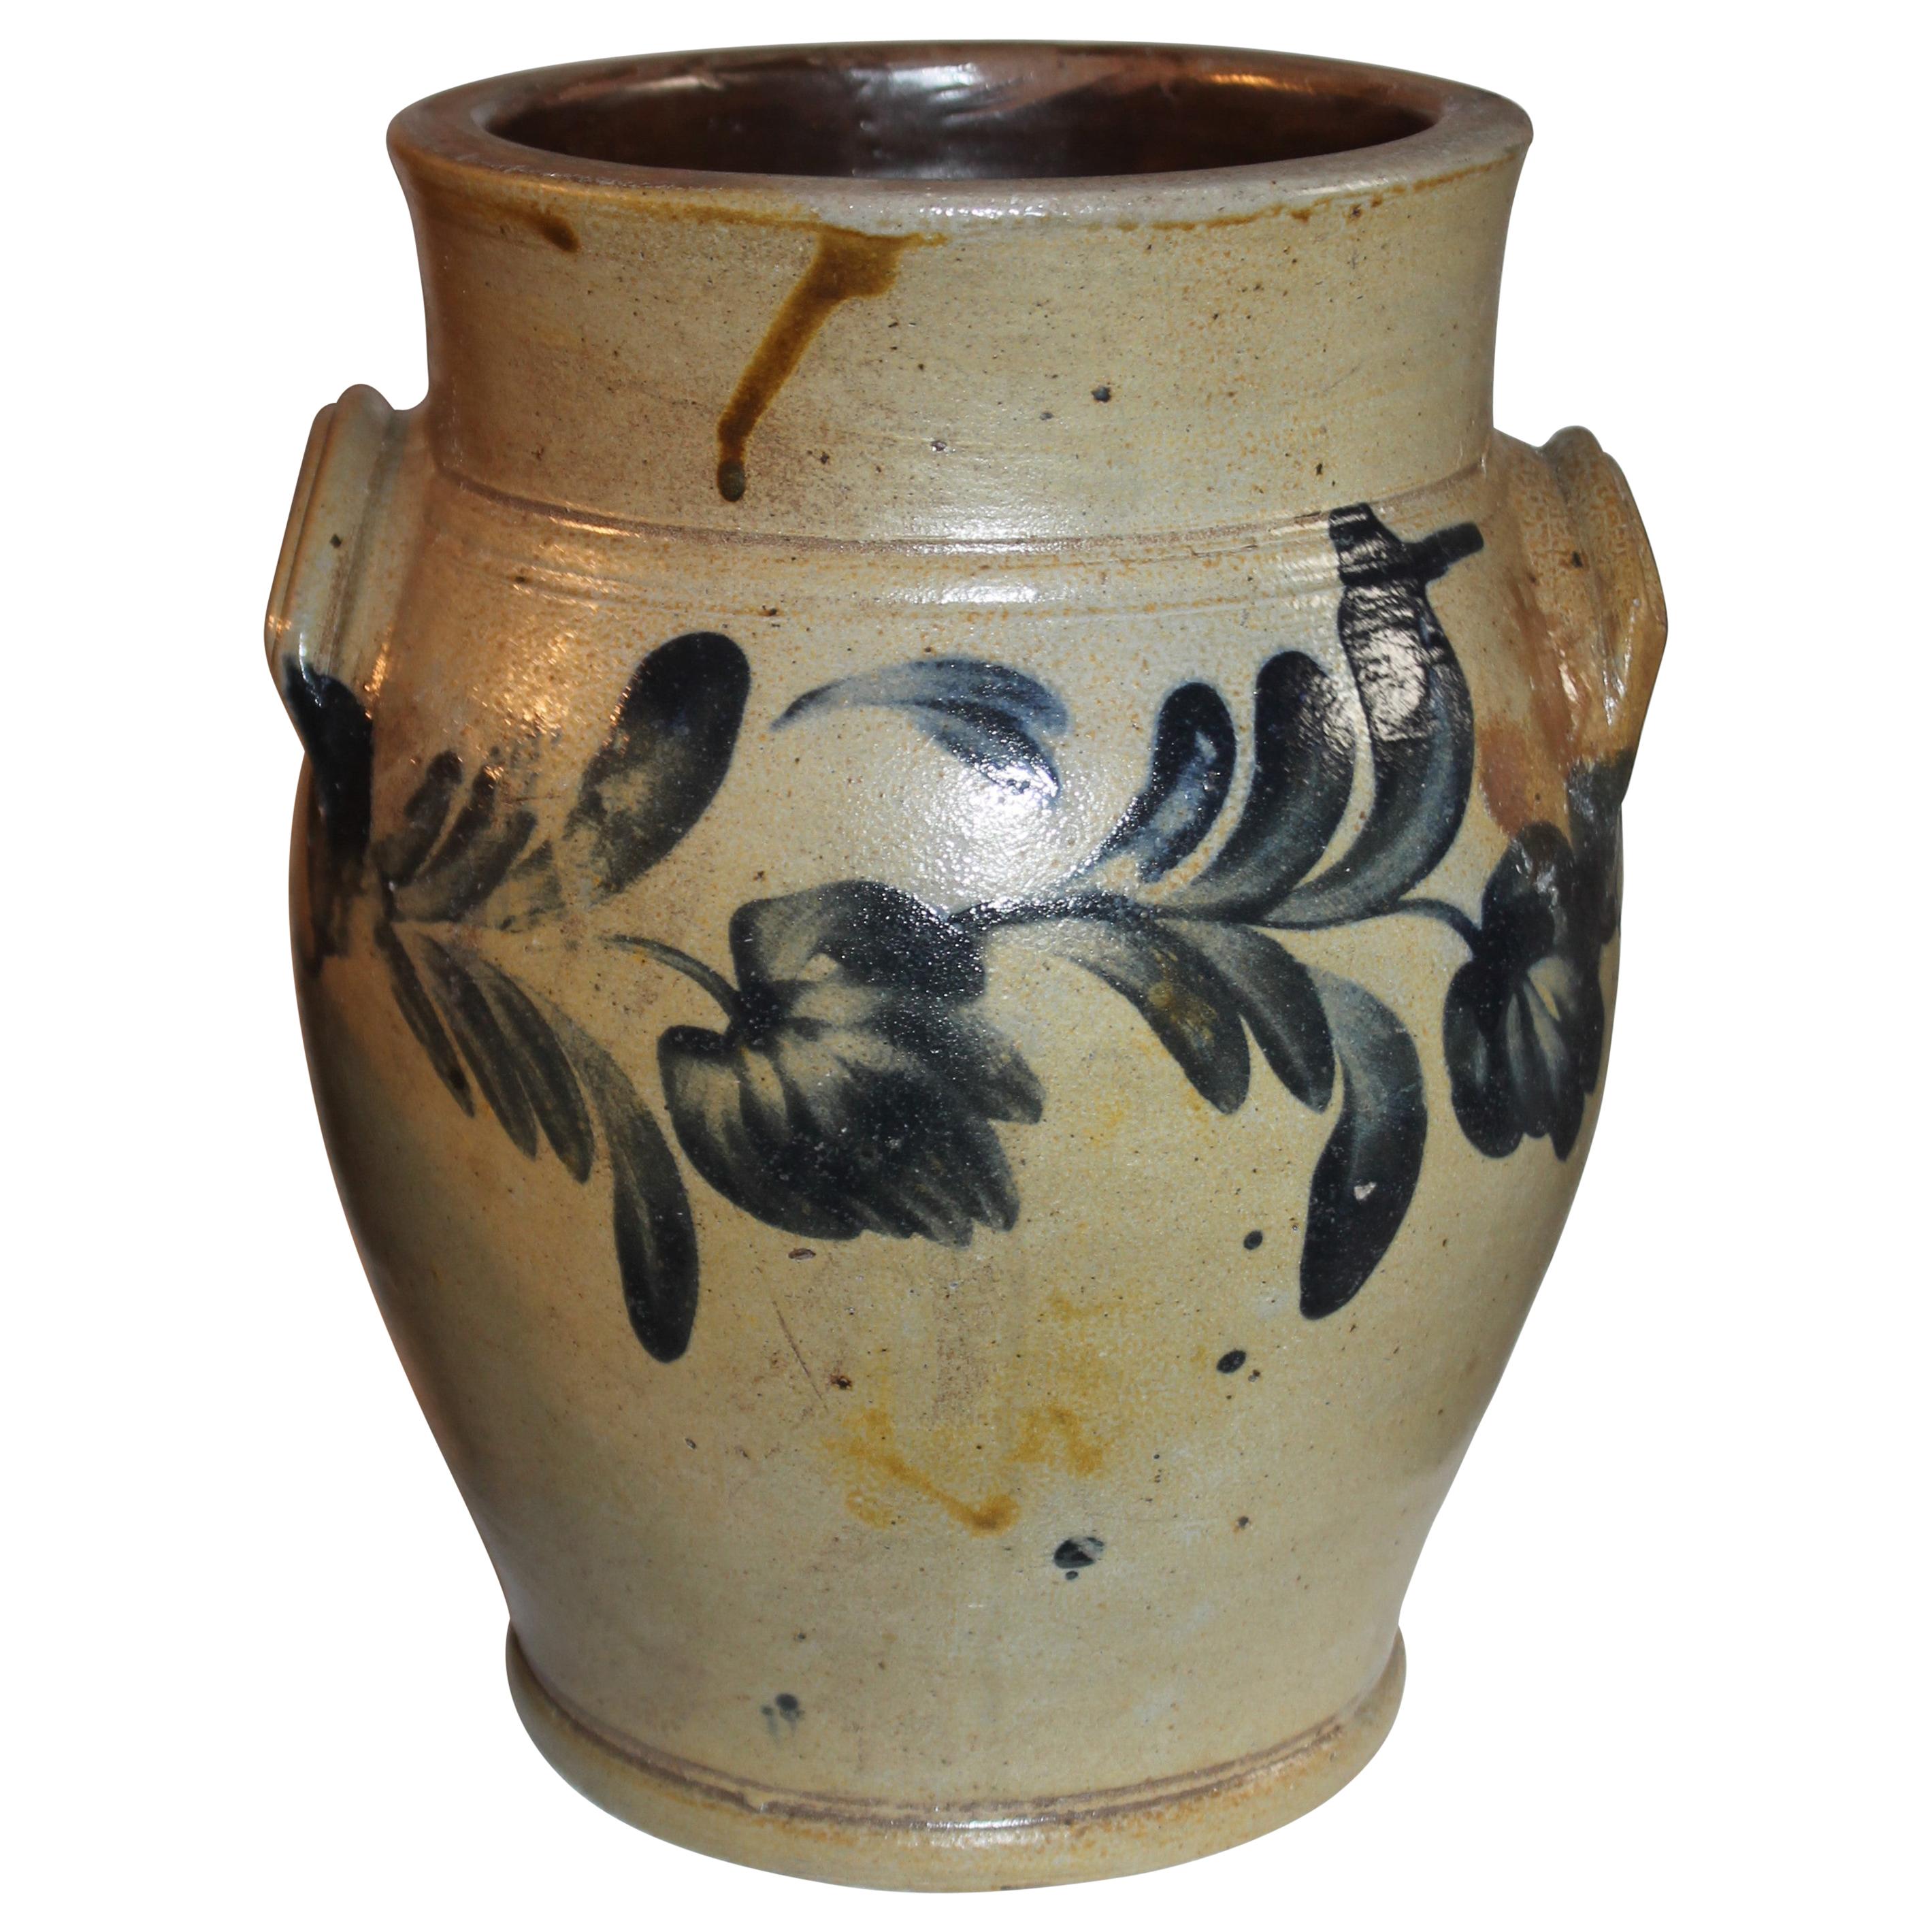 19thc Decorated Crock with Handles from Pennsylvania